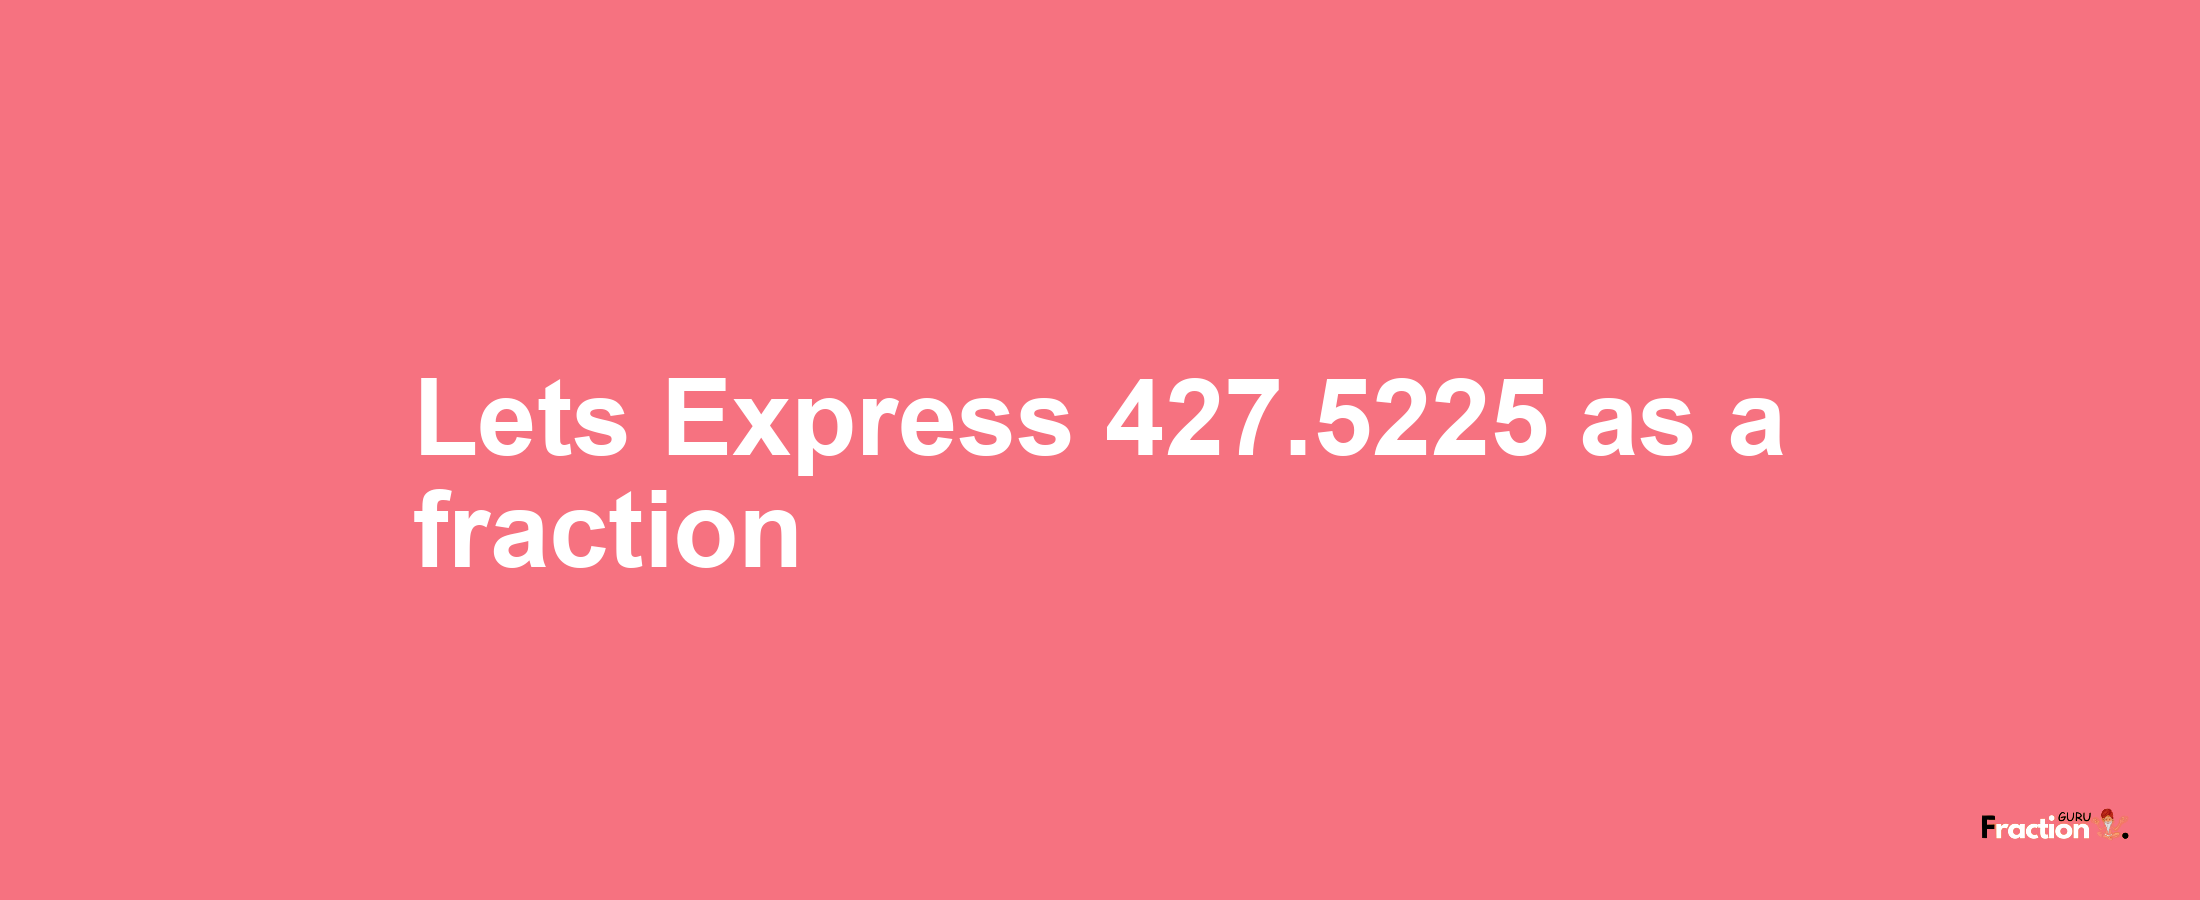 Lets Express 427.5225 as afraction